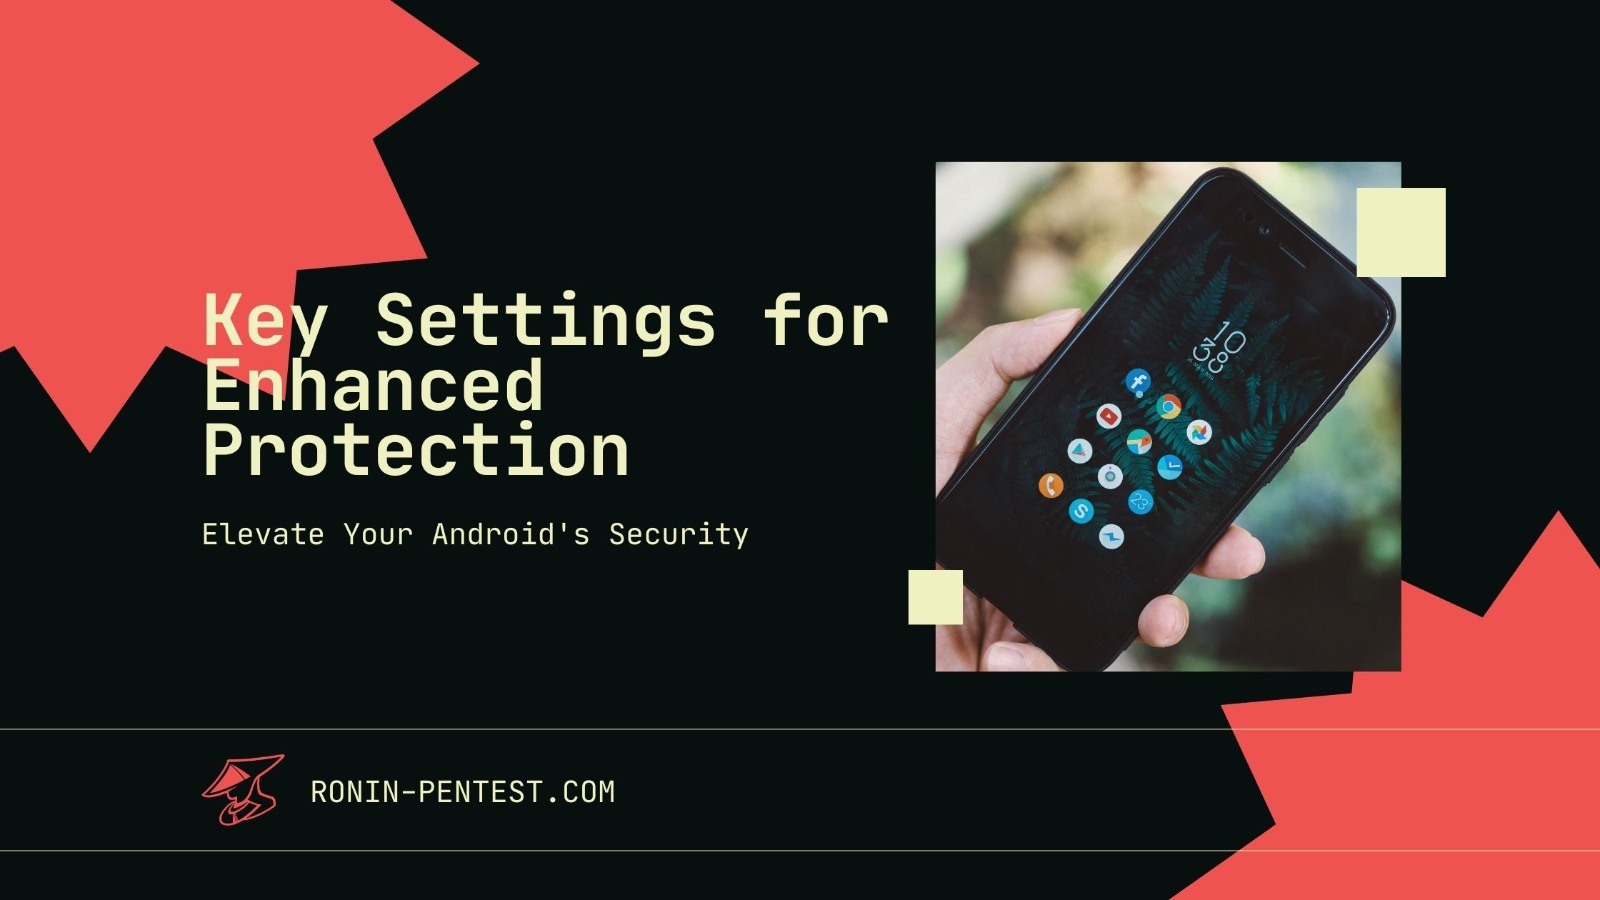 Ronin Pentest | Elevate Your Android's Security: Key Settings for Enhanced Protection